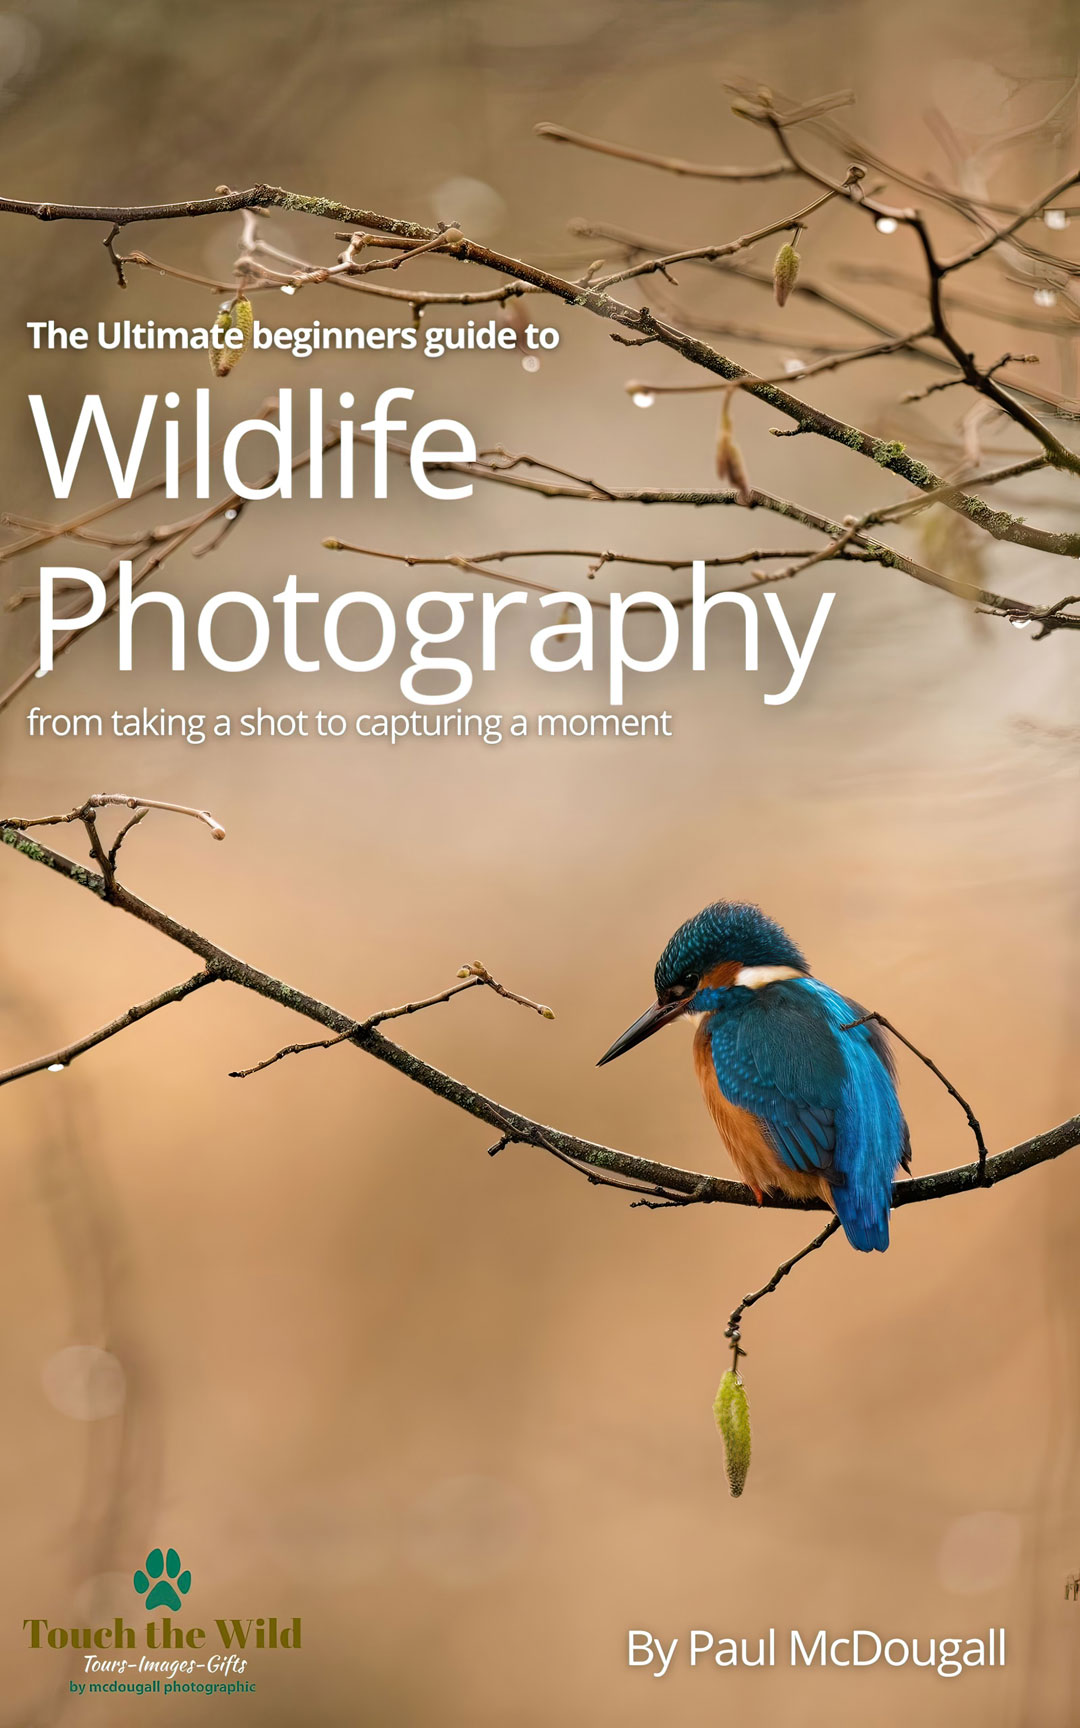 The Ultimate Beginners Guide to Wildlife Photography